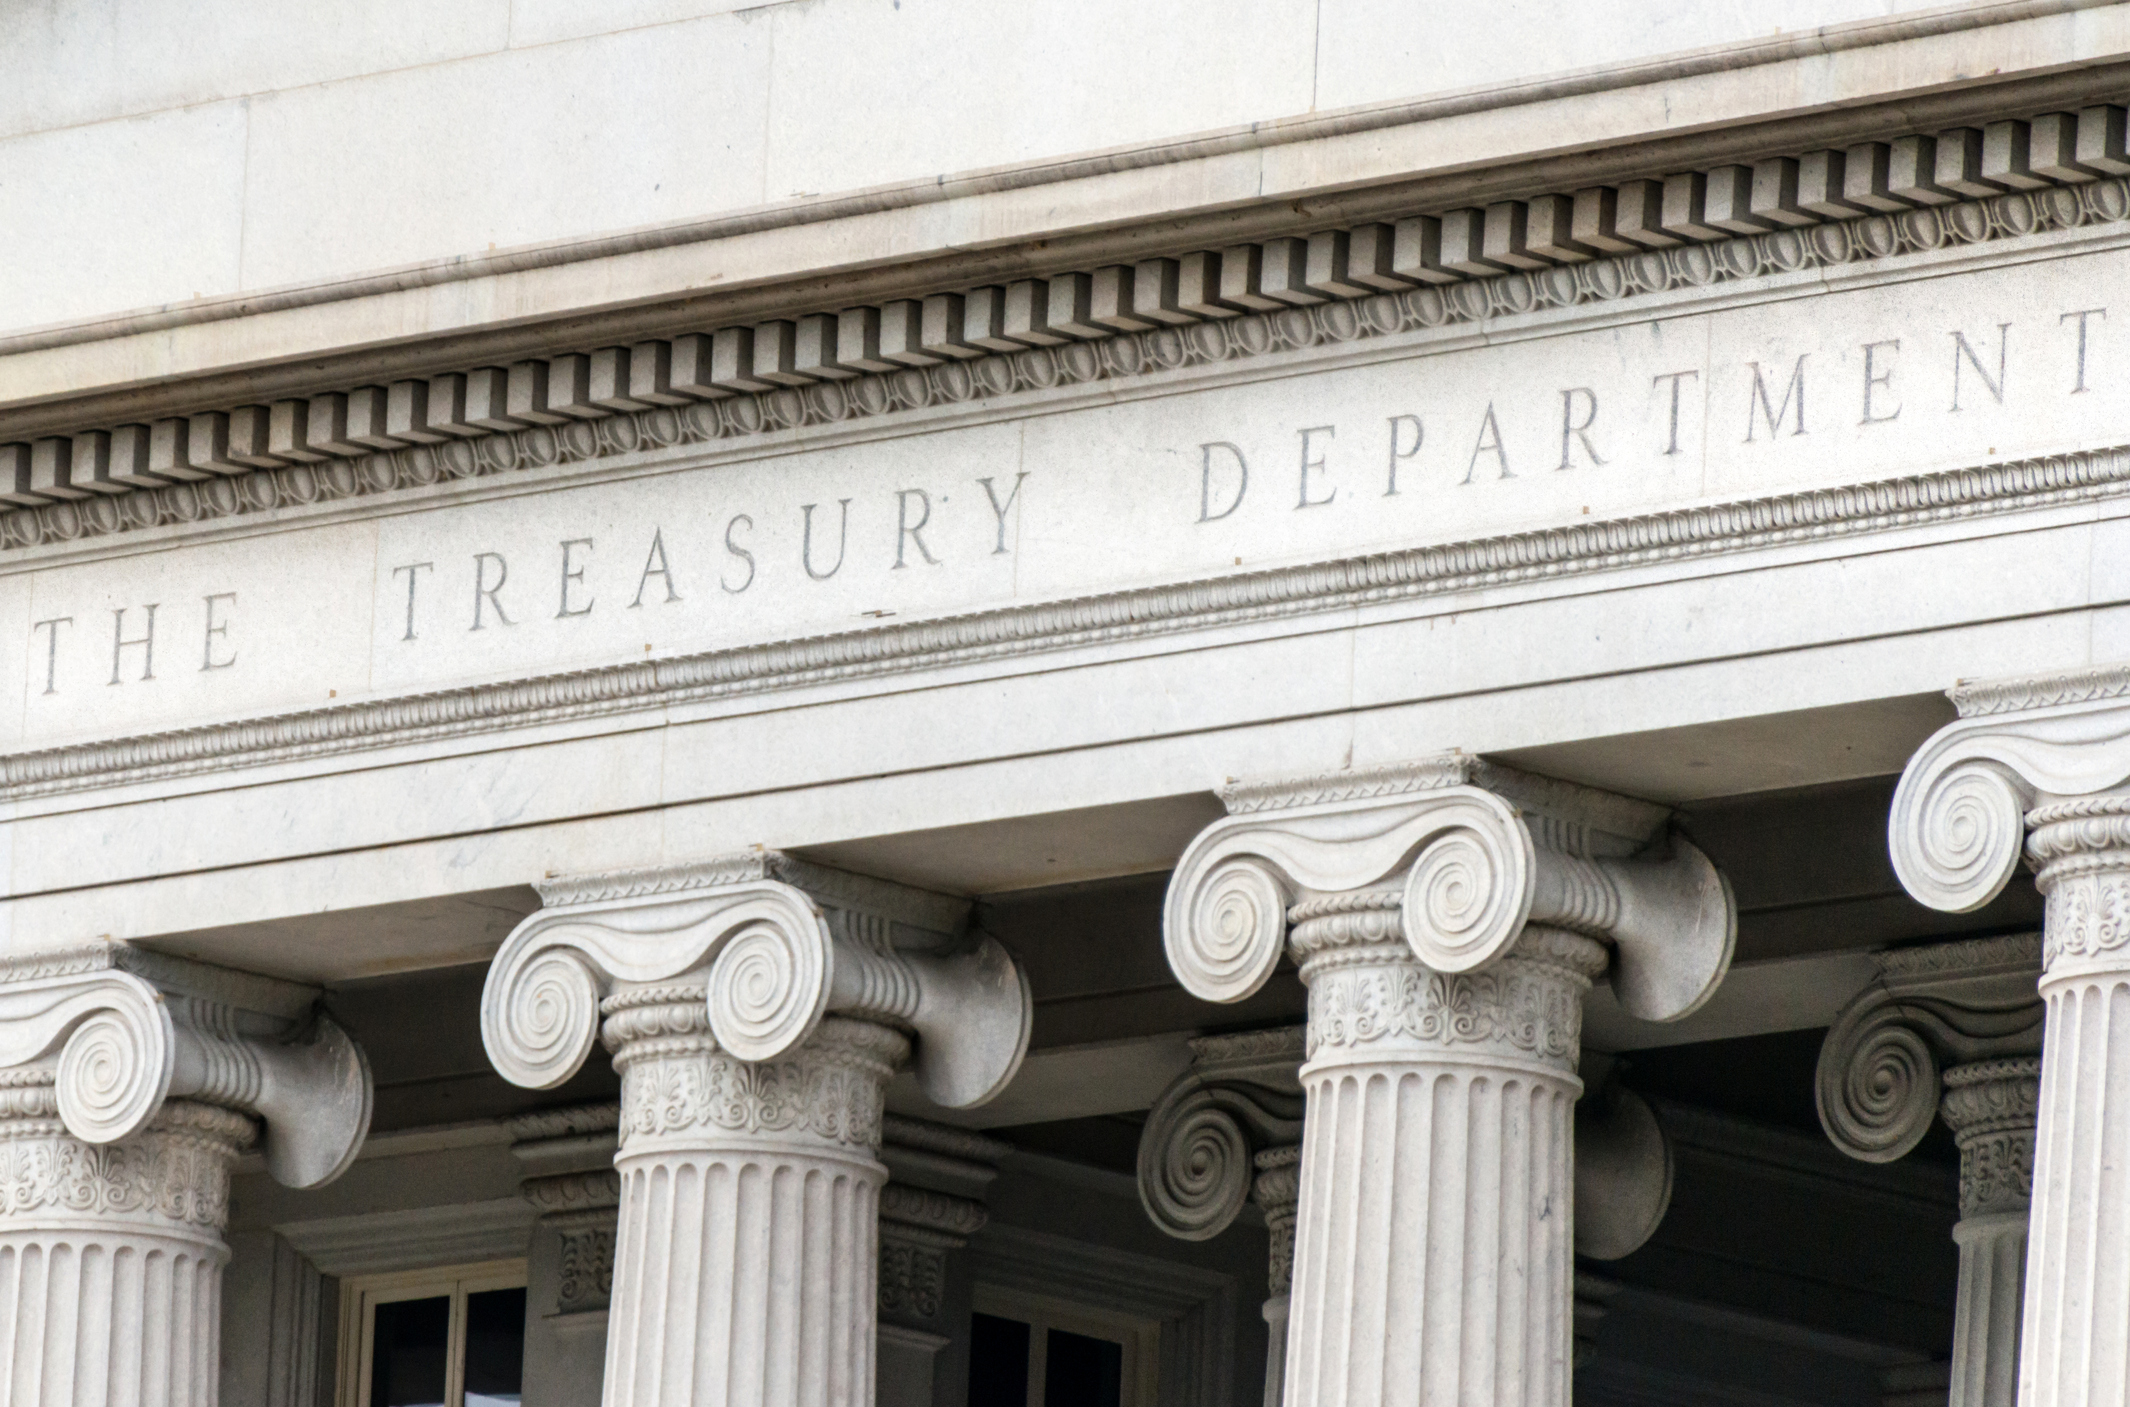 U.S. Treasury Department sign in Washington D.C. building facade. The U.S. budget deficit is set to widen to $1 trillion by fiscal year 2020, two years sooner than previously estimated, according to the Congressional Budget Office findings Wednesday. (Juanmonino&mdash;Getty Images/iStockphoto)